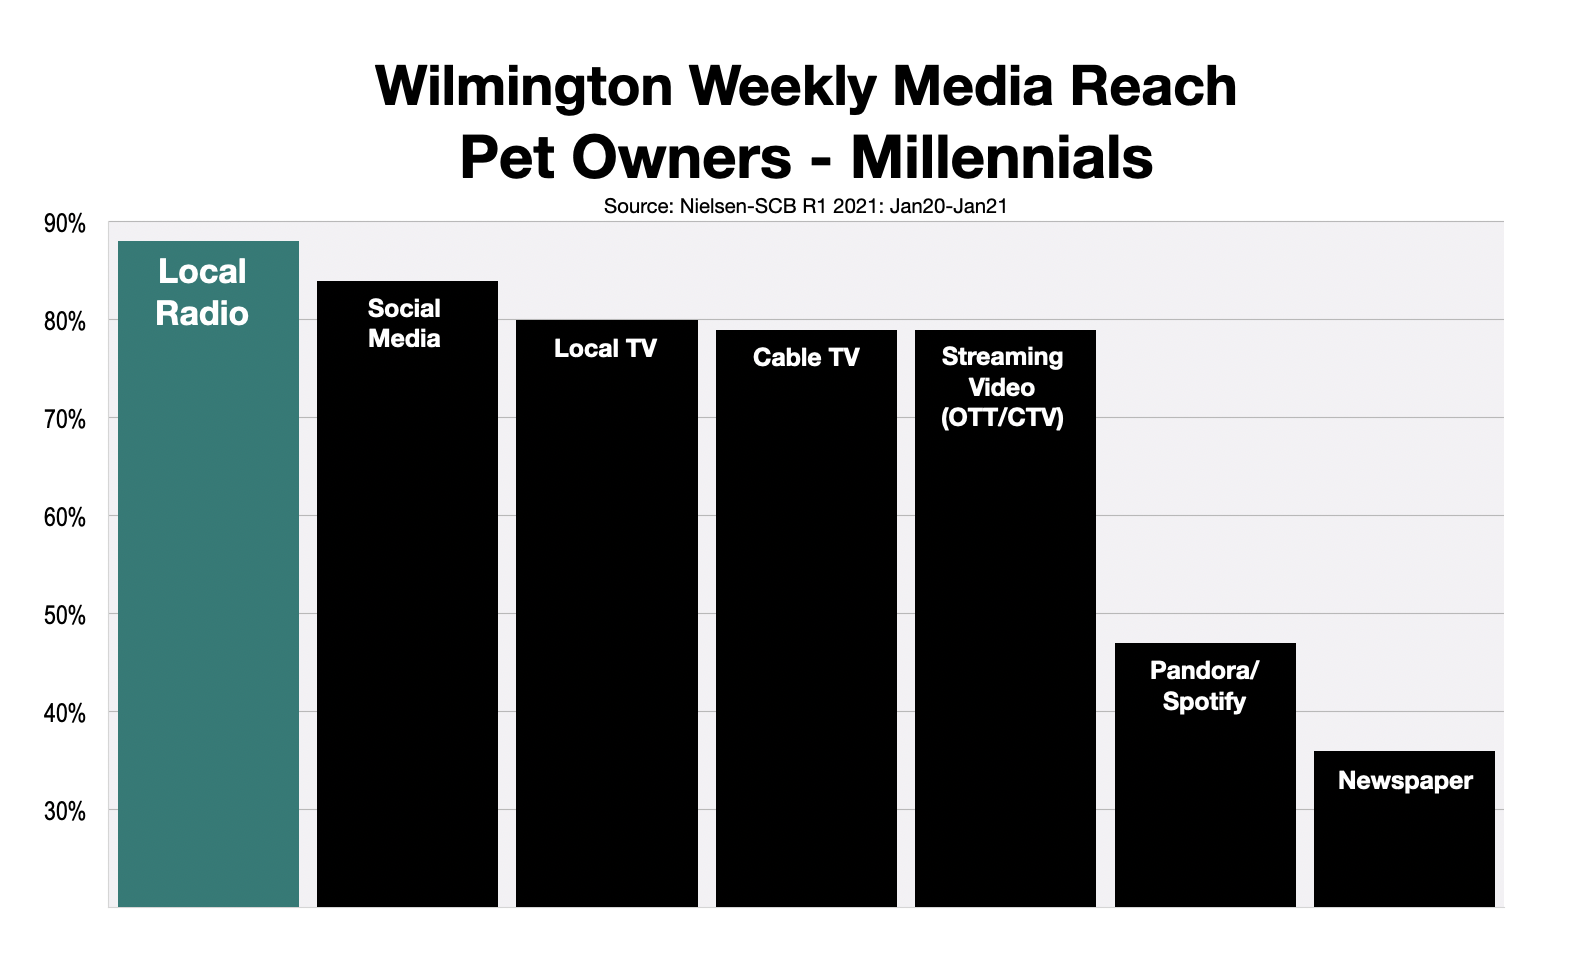 Advertise To Millennials In Wilmington: Pet Owners